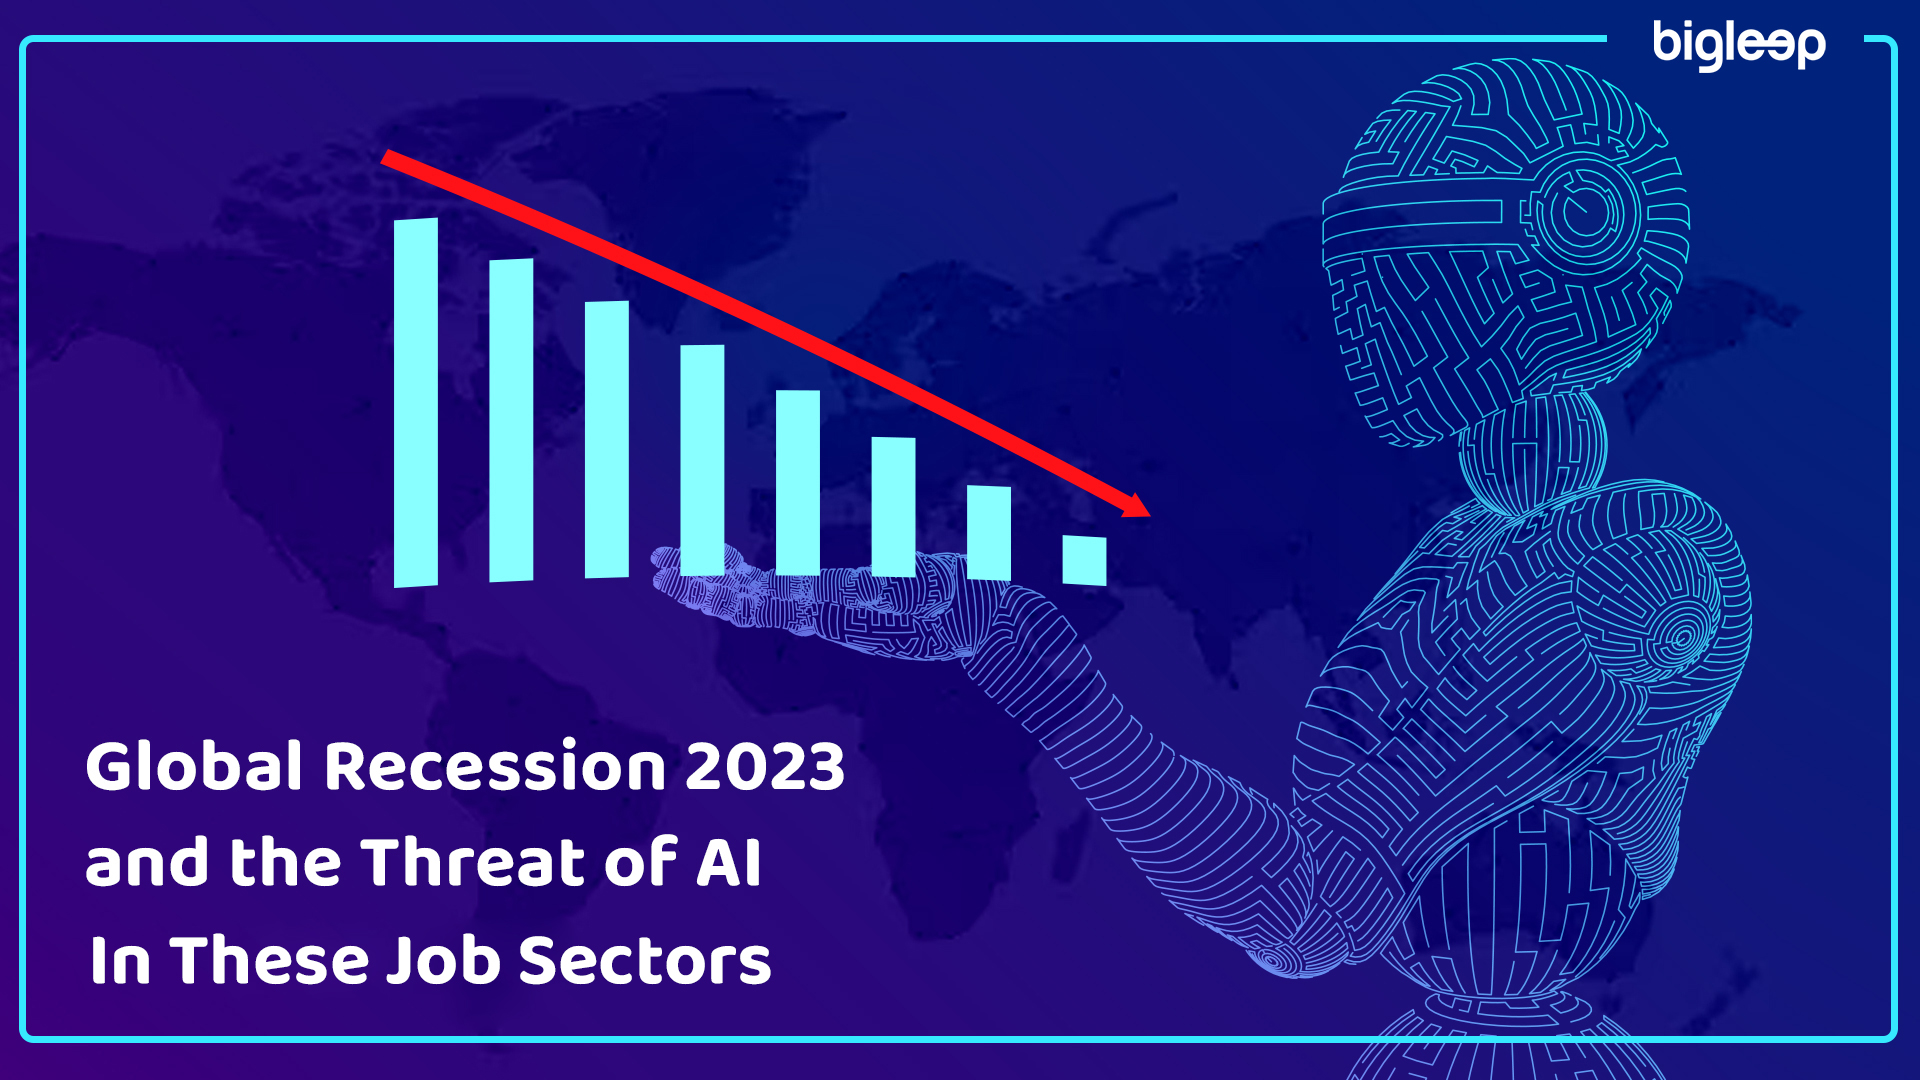 Global Recession 2023 and the Threat of AI in These Job Sectors 